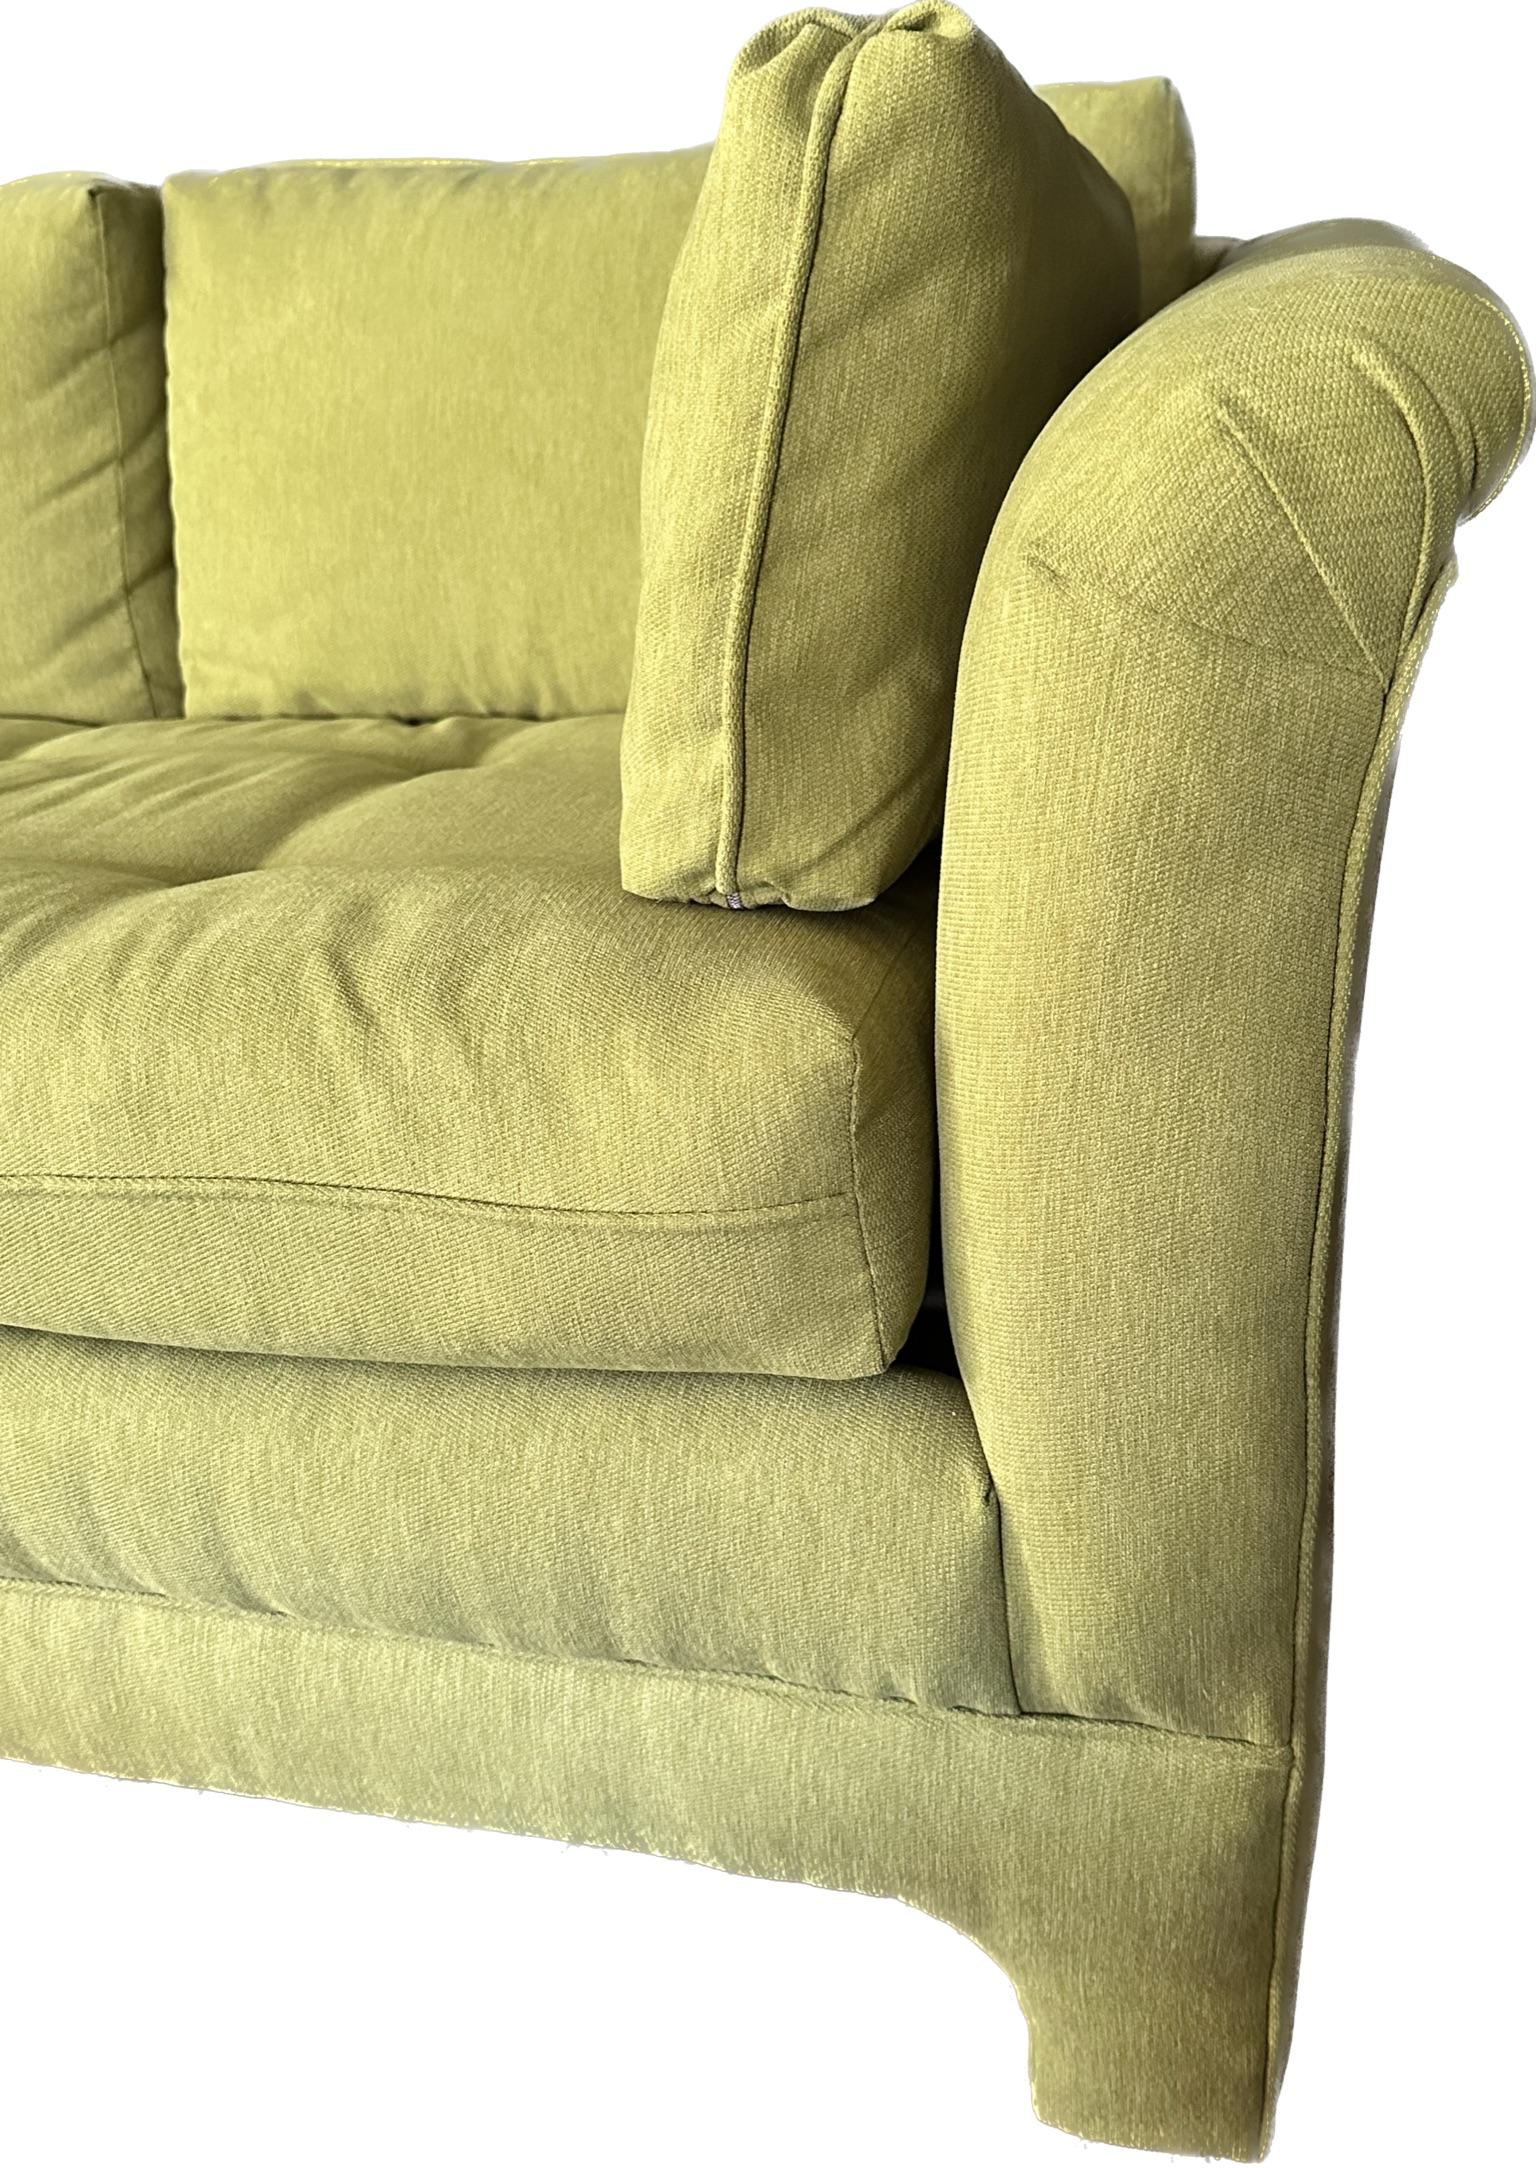 American Vintage 70s Bench Seat Sofa Newly Upholstered in Chartreuse Crypton Fabric For Sale